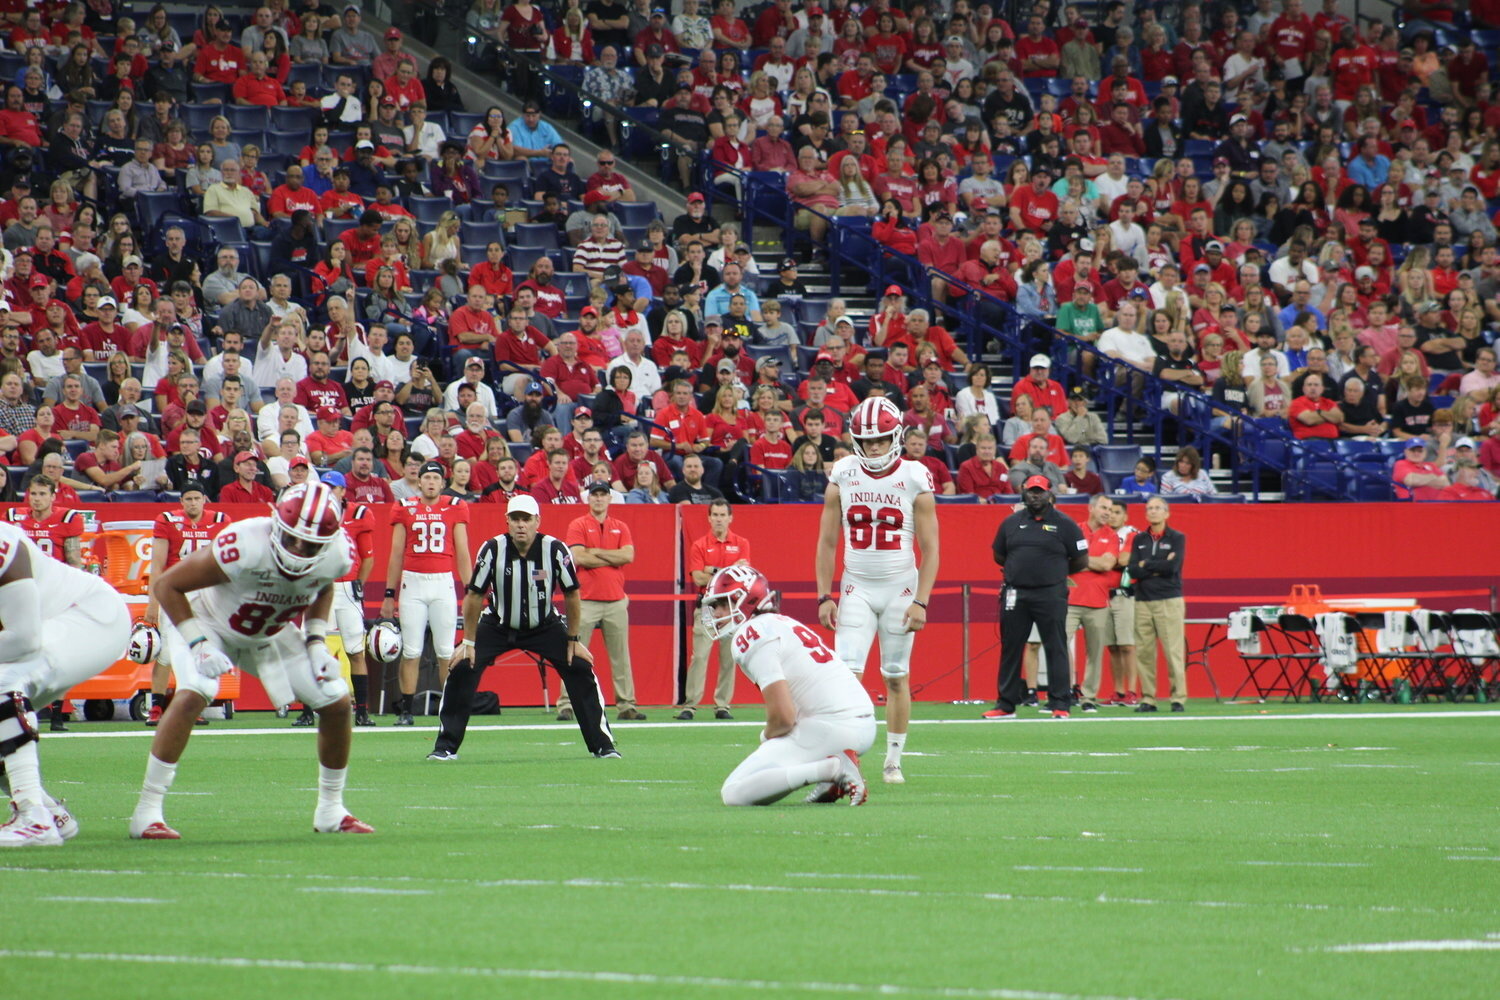  Fifth-year Senior Kicker Logan Justus kicks IU to victory over Ball State in their season-opener game at Lucas Oil Stadium. Justus went 4-4 for field goals, setting his career-high three times over in that game with his successful 48, 49, and 50-yar